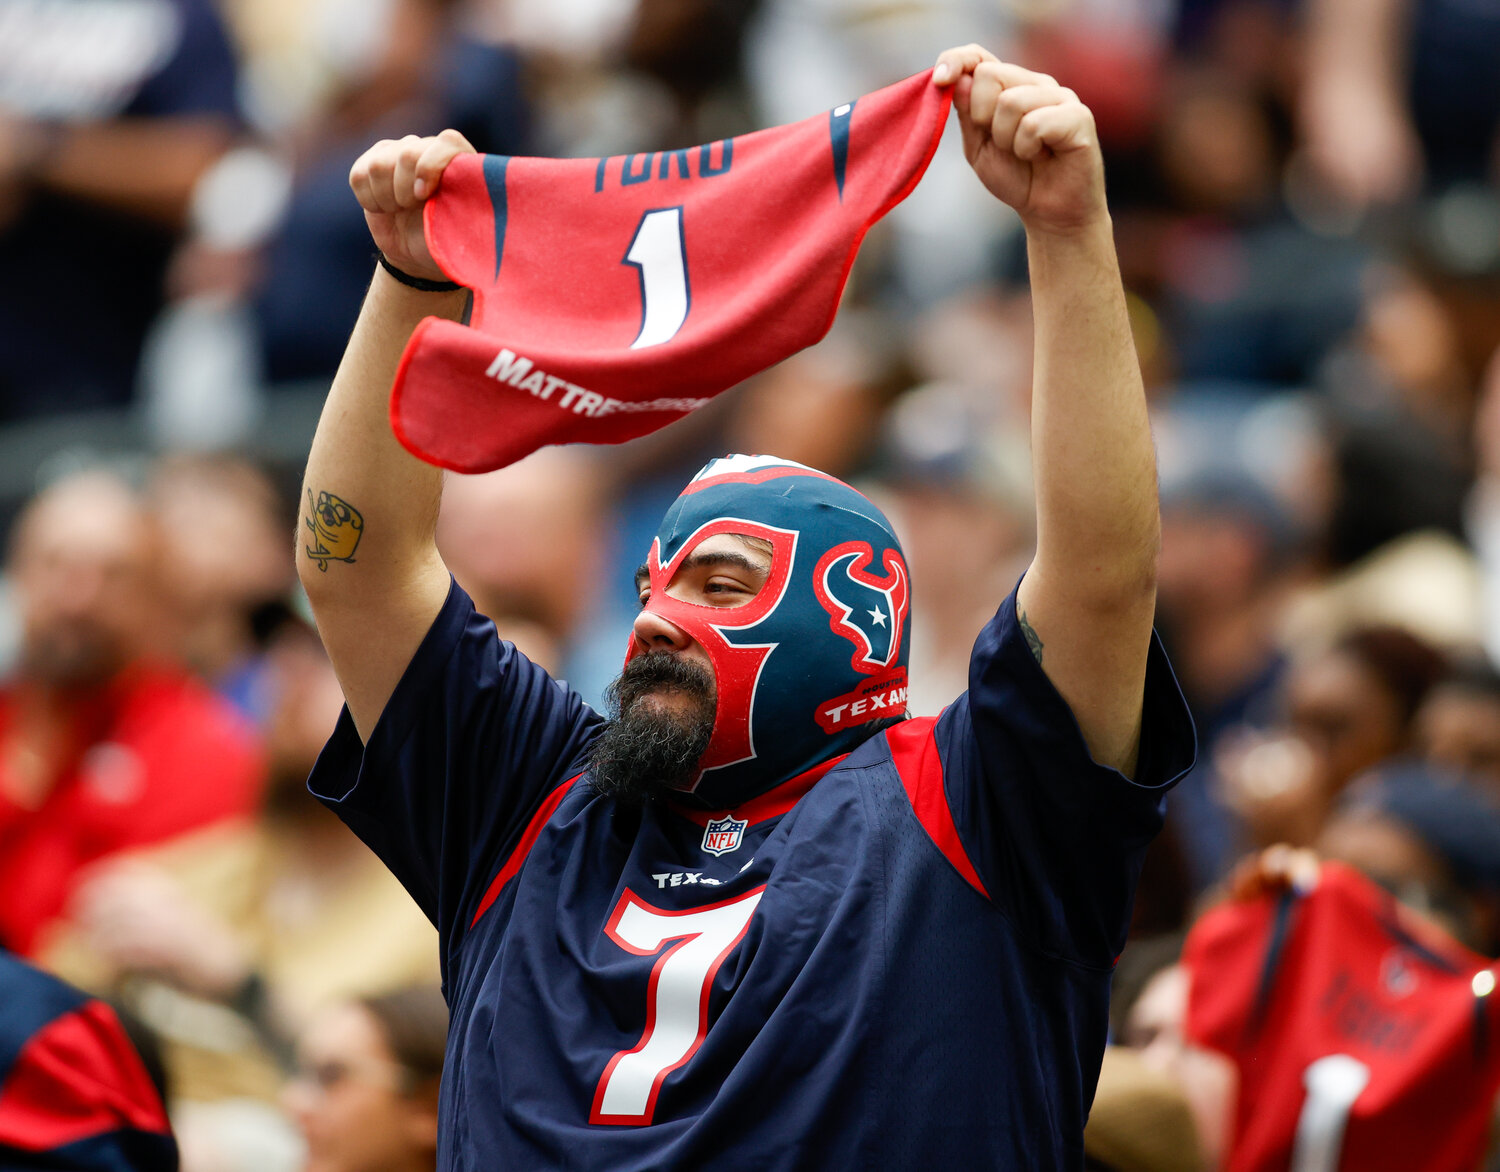 A Houston Texans fan during an NFL game between the Texans and the Saints on October 15, 2023 in Houston. The Texans won, 20-13.